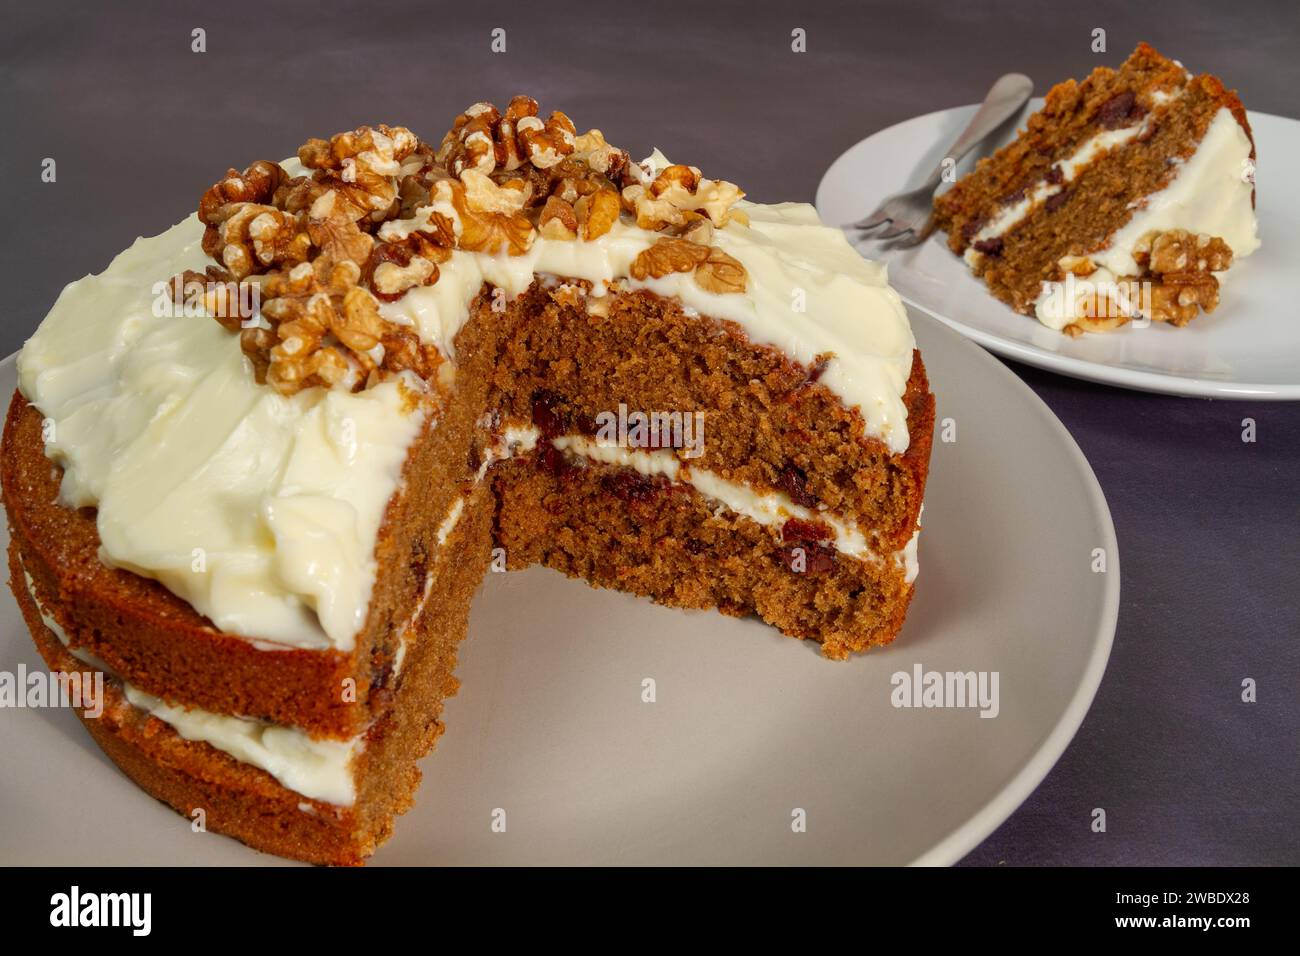 Coffee, chocolate and walnut cake and serving Stock Photo